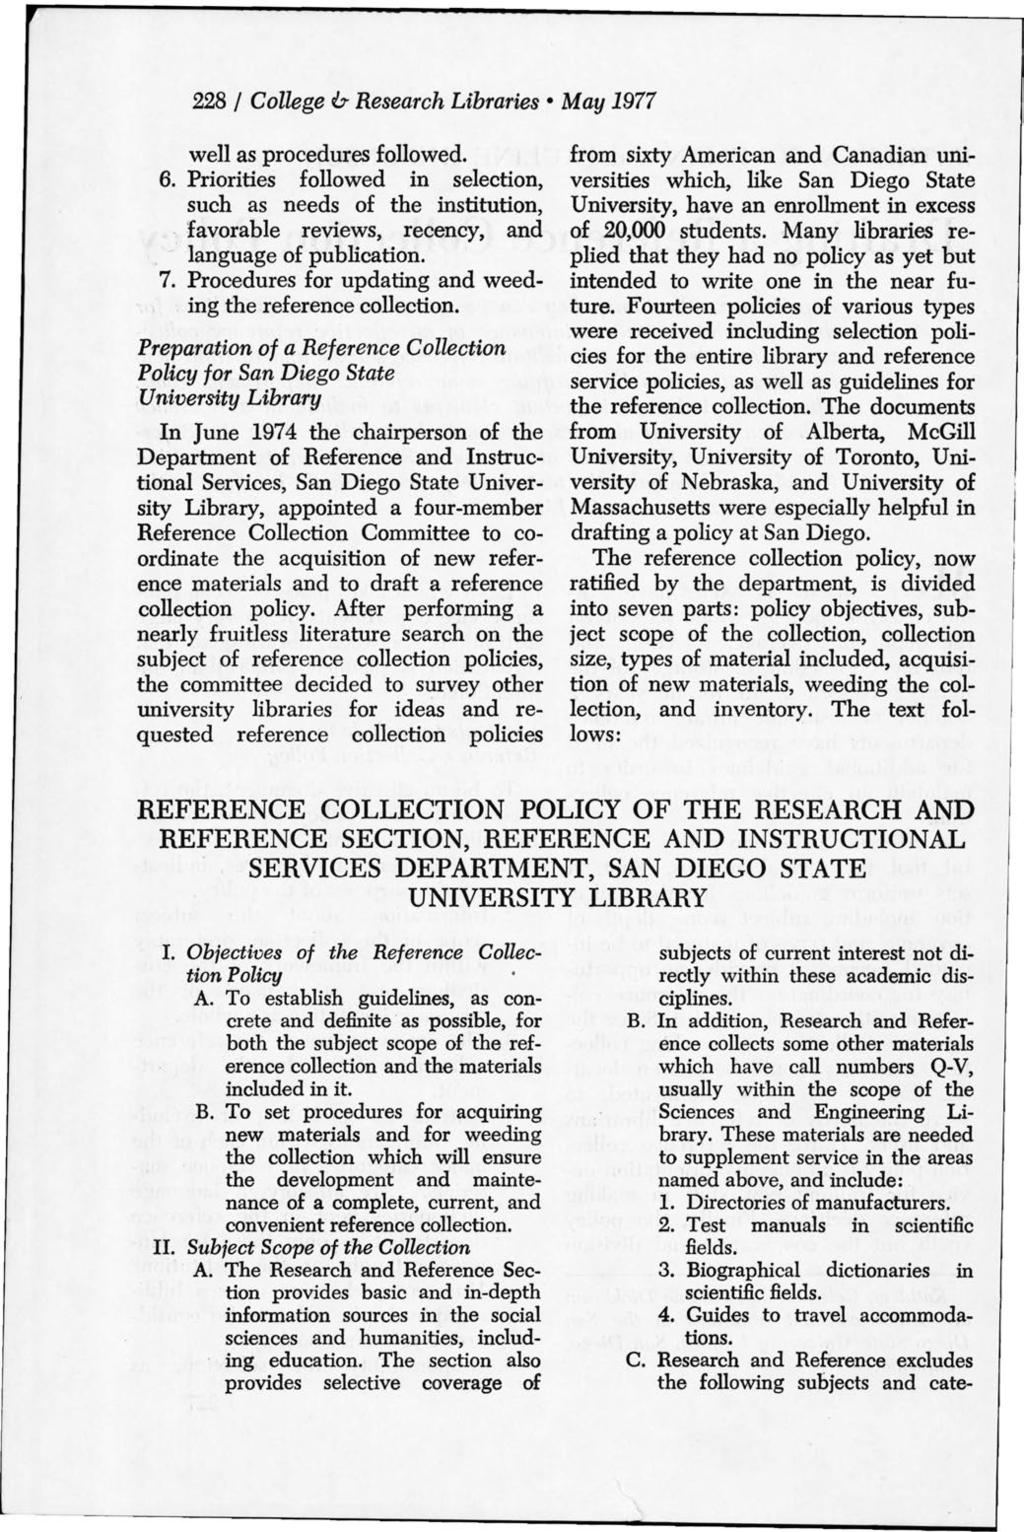 228 I College & Research Libraries May 1977 well as procedures followed. 6. Priorities followed in selection, such as needs of the institution, favorable reviews, recency, and language of publication.